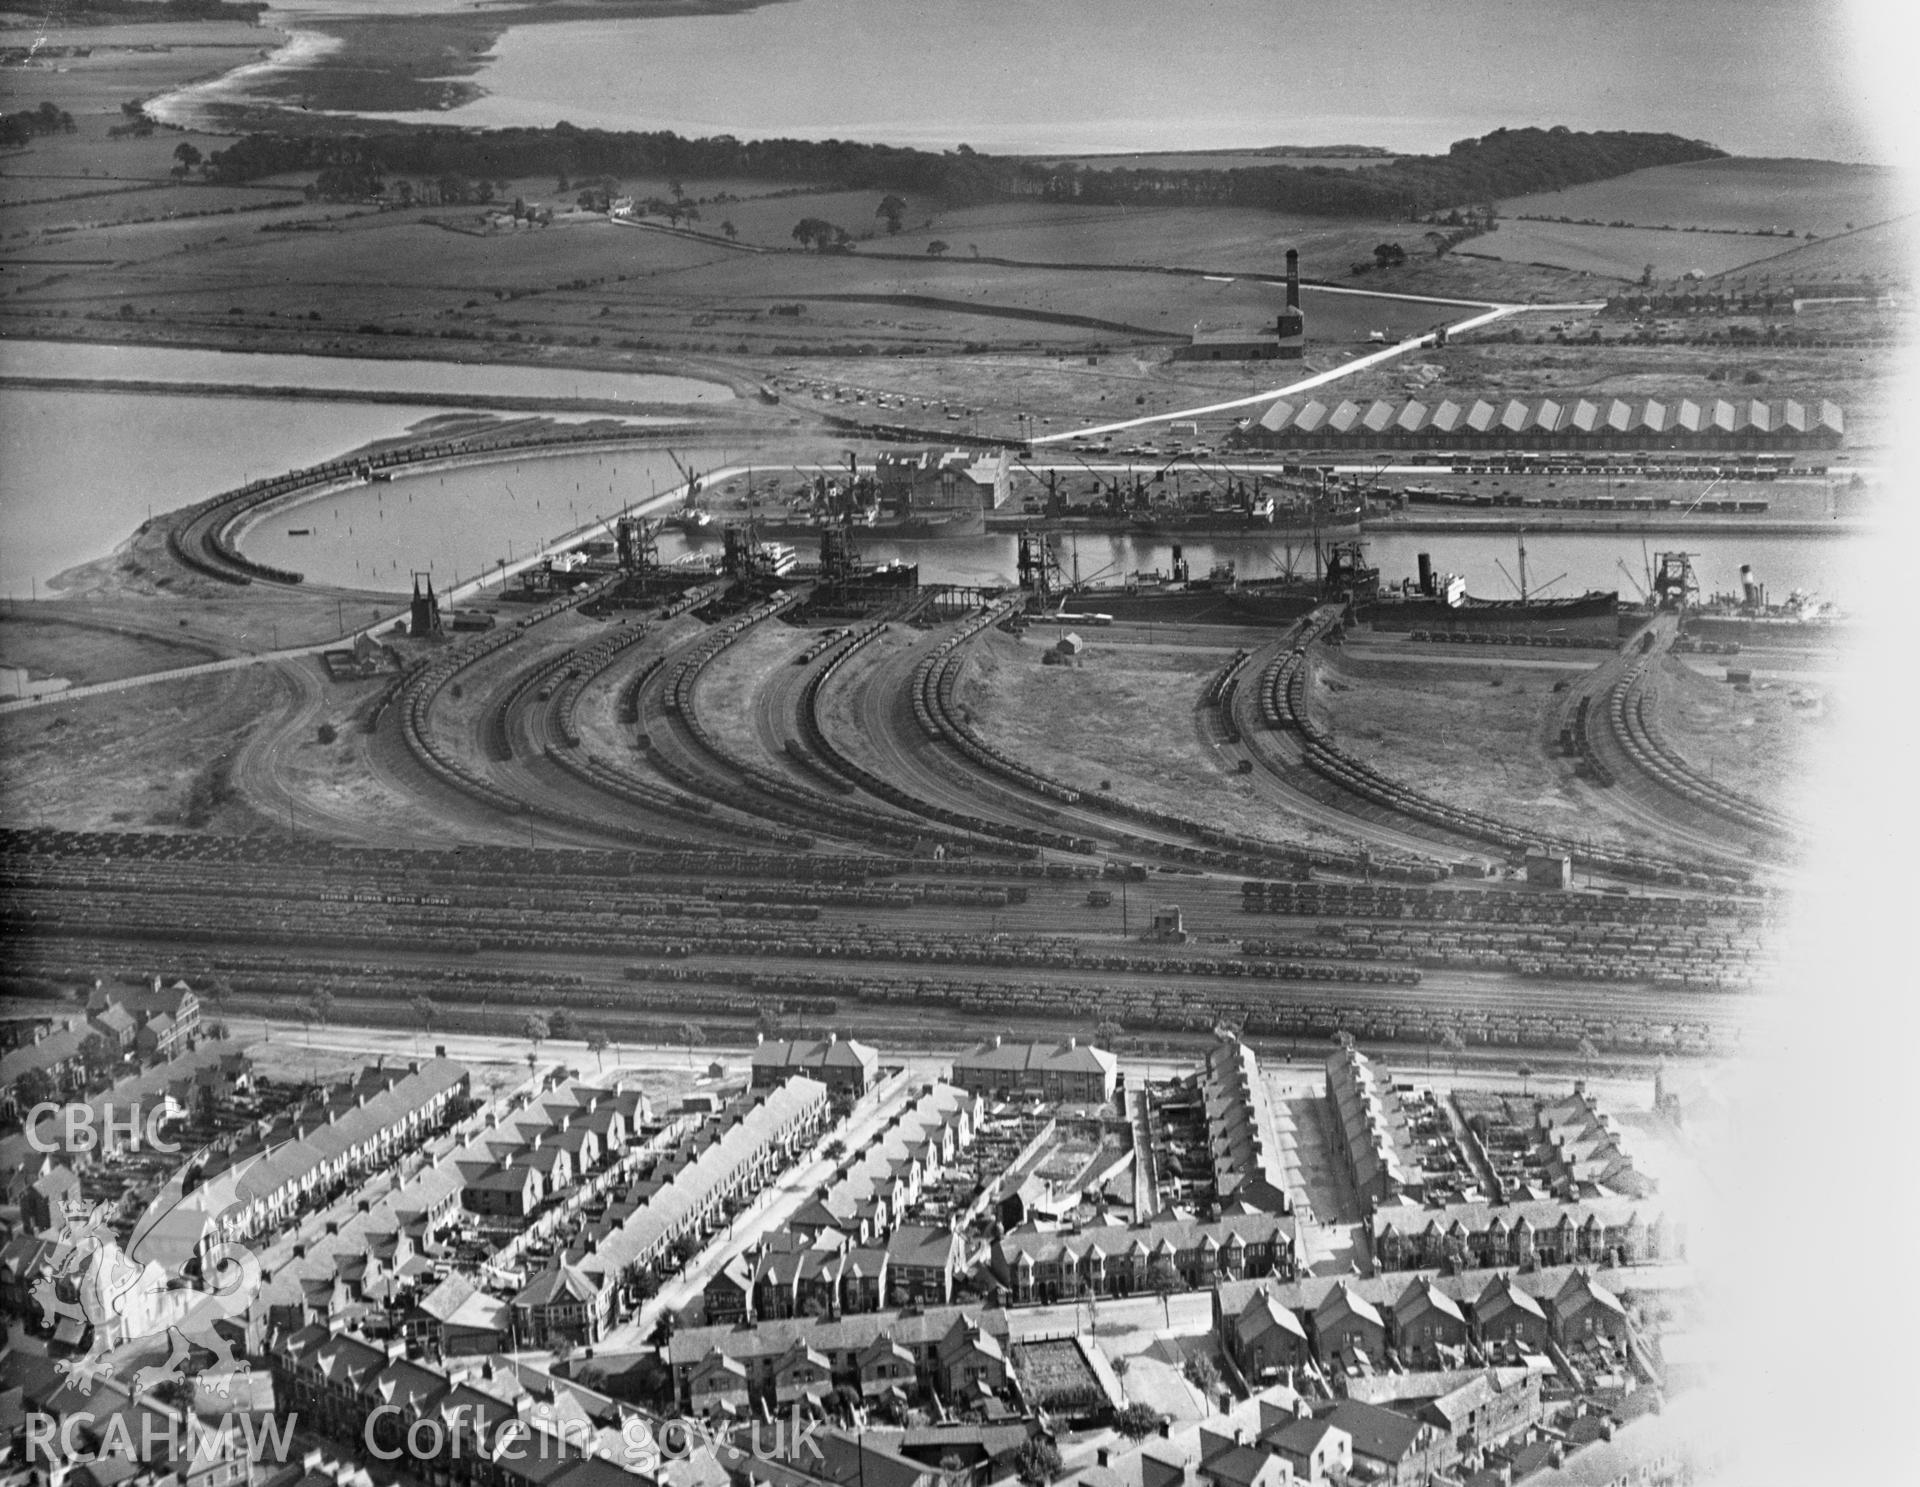 View of Barry showing docks with 'Bedwas' railway trucks. Oblique aerial photograph, 5?x4? BW glass plate.